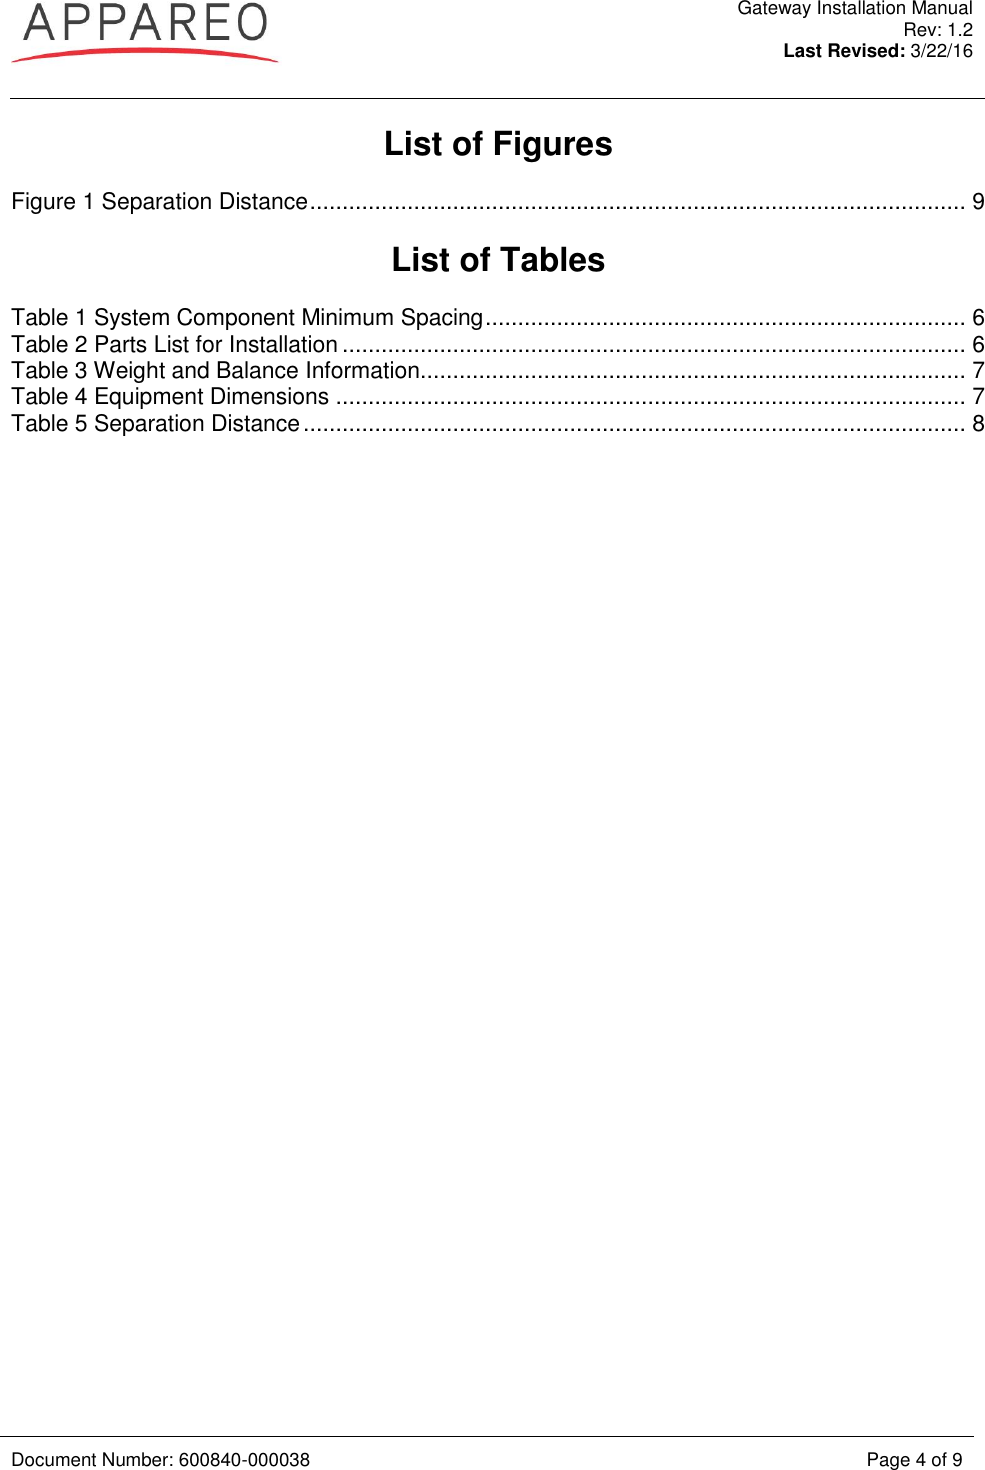  Gateway Installation Manual Rev: 1.2 Last Revised: 3/22/16   Document Number: 600840-000038 Page 4 of 9  List of Figures Figure 1 Separation Distance ..................................................................................................... 9  List of Tables Table 1 System Component Minimum Spacing .......................................................................... 6 Table 2 Parts List for Installation ................................................................................................ 6 Table 3 Weight and Balance Information.................................................................................... 7 Table 4 Equipment Dimensions ................................................................................................. 7 Table 5 Separation Distance ...................................................................................................... 8 